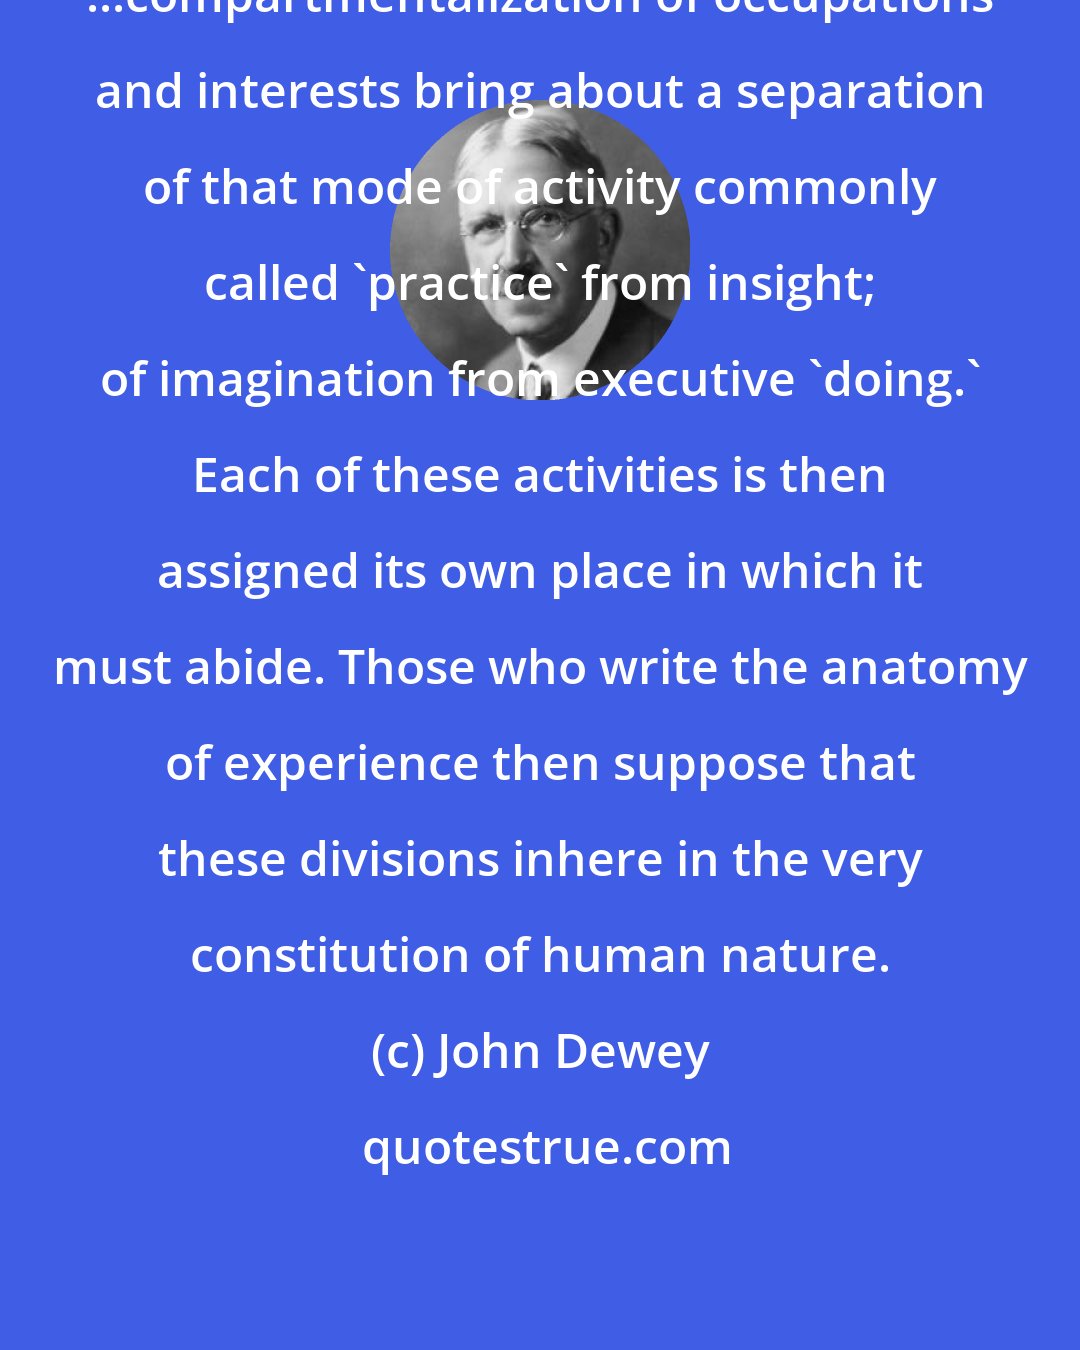 John Dewey: ...compartmentalization of occupations and interests bring about a separation of that mode of activity commonly called 'practice' from insight; of imagination from executive 'doing.' Each of these activities is then assigned its own place in which it must abide. Those who write the anatomy of experience then suppose that these divisions inhere in the very constitution of human nature.